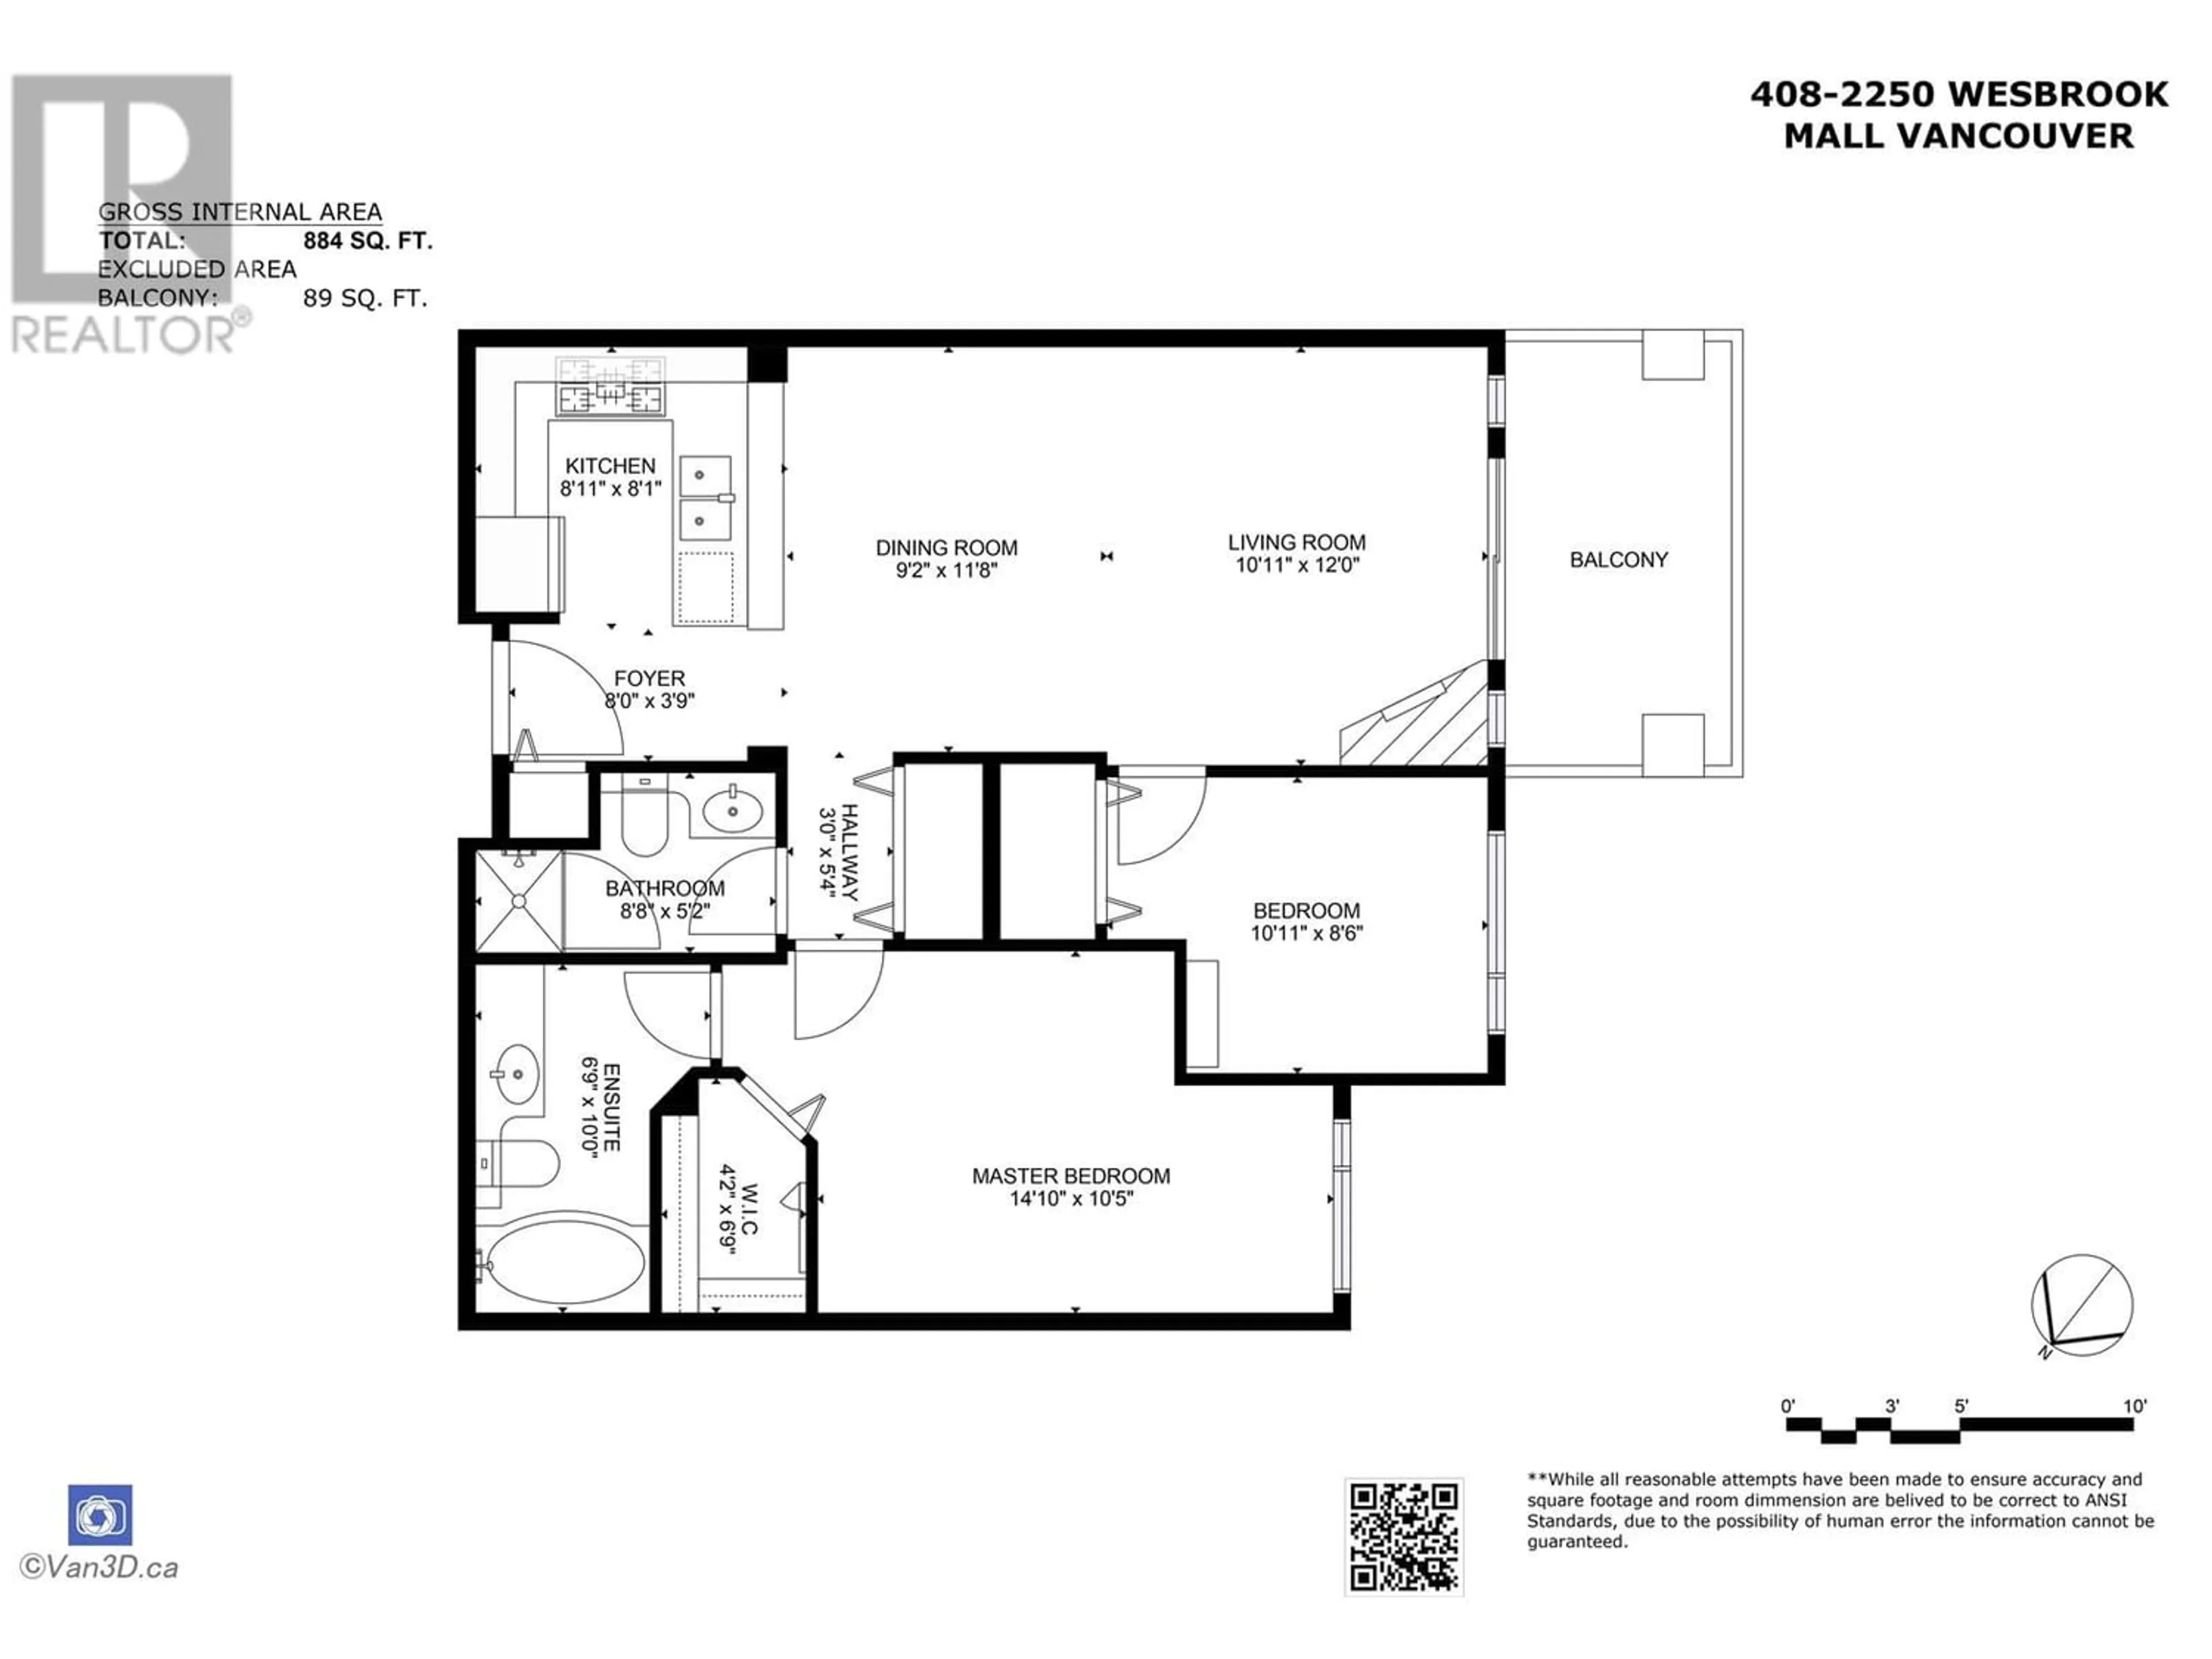 Floor plan for 408 2250 WESBROOK MALL, Vancouver British Columbia V6T0A6